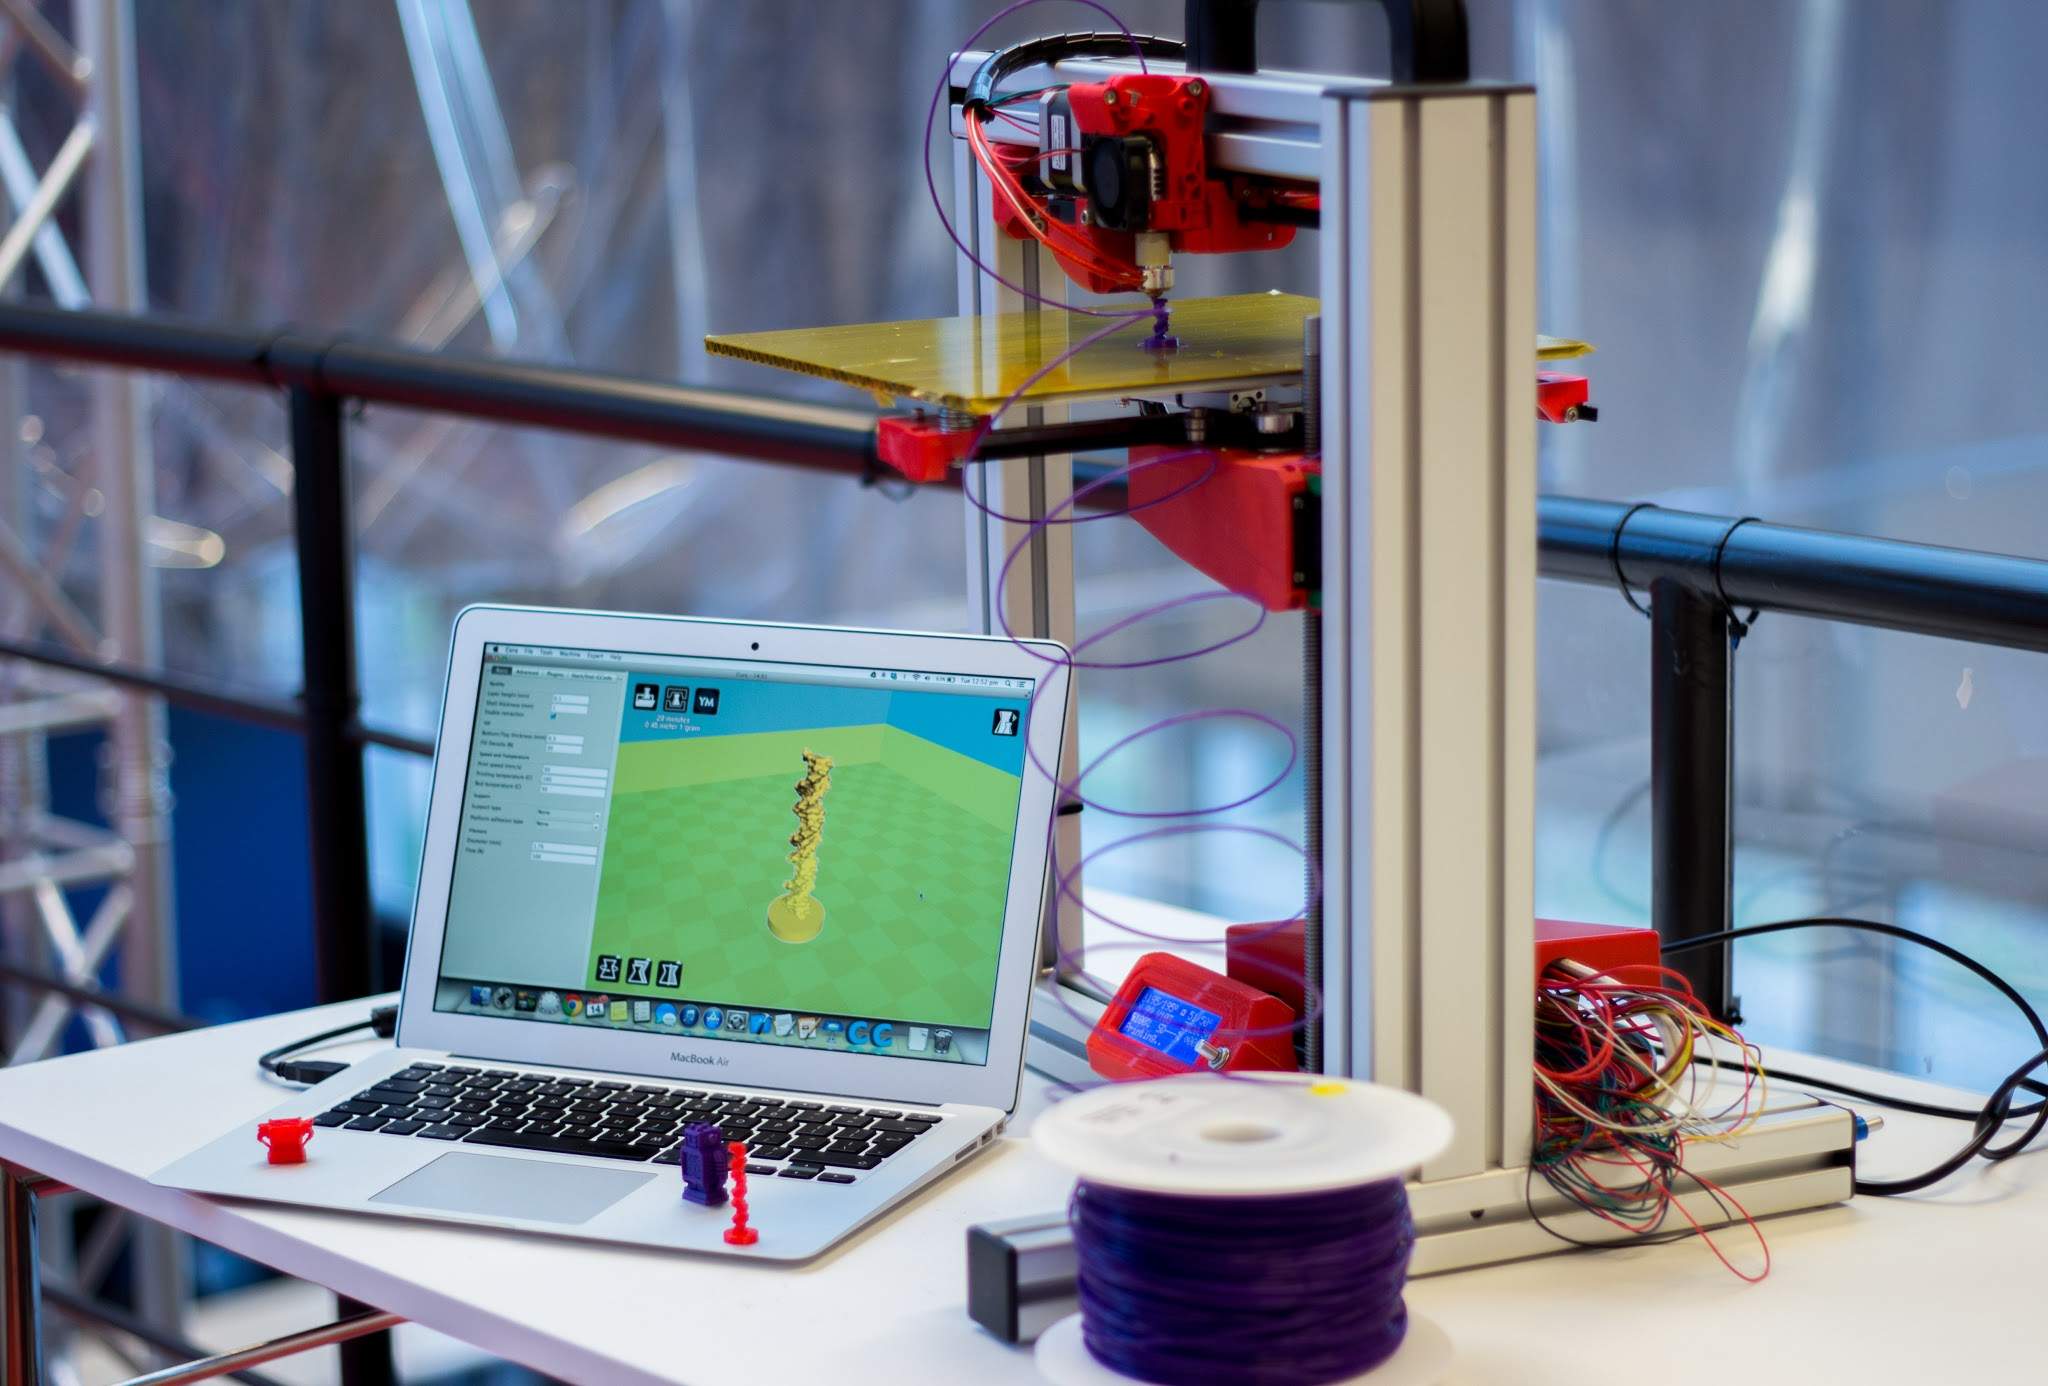 3D-printed objects: Five essential items crafted by additive manufacturing - 3D Printer